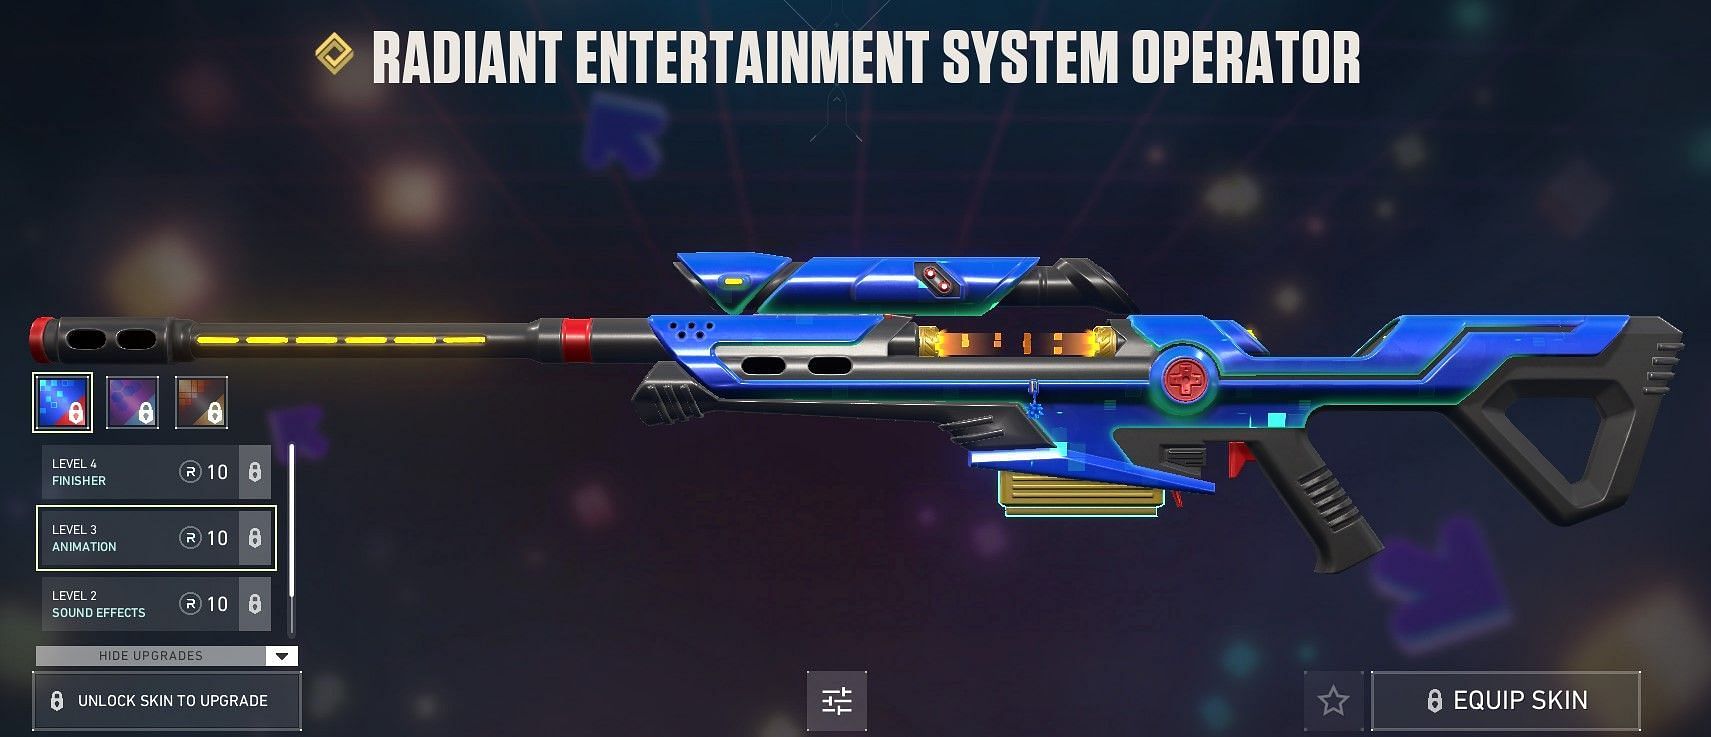 Radiant Entertainment System Operator (Image via Riot Games)